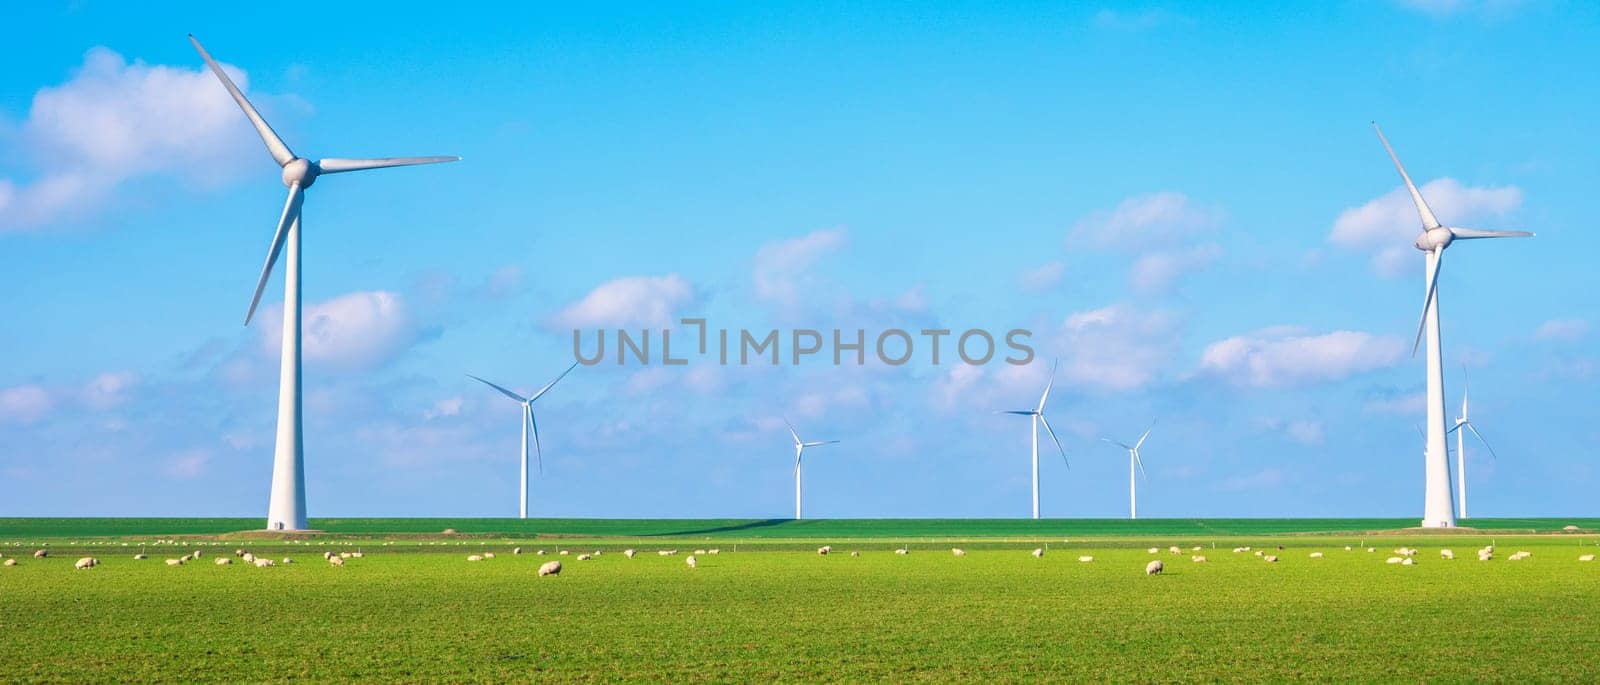 Windmill park in the ocean, drone aerial view of windmill turbines generating green energy by fokkebok